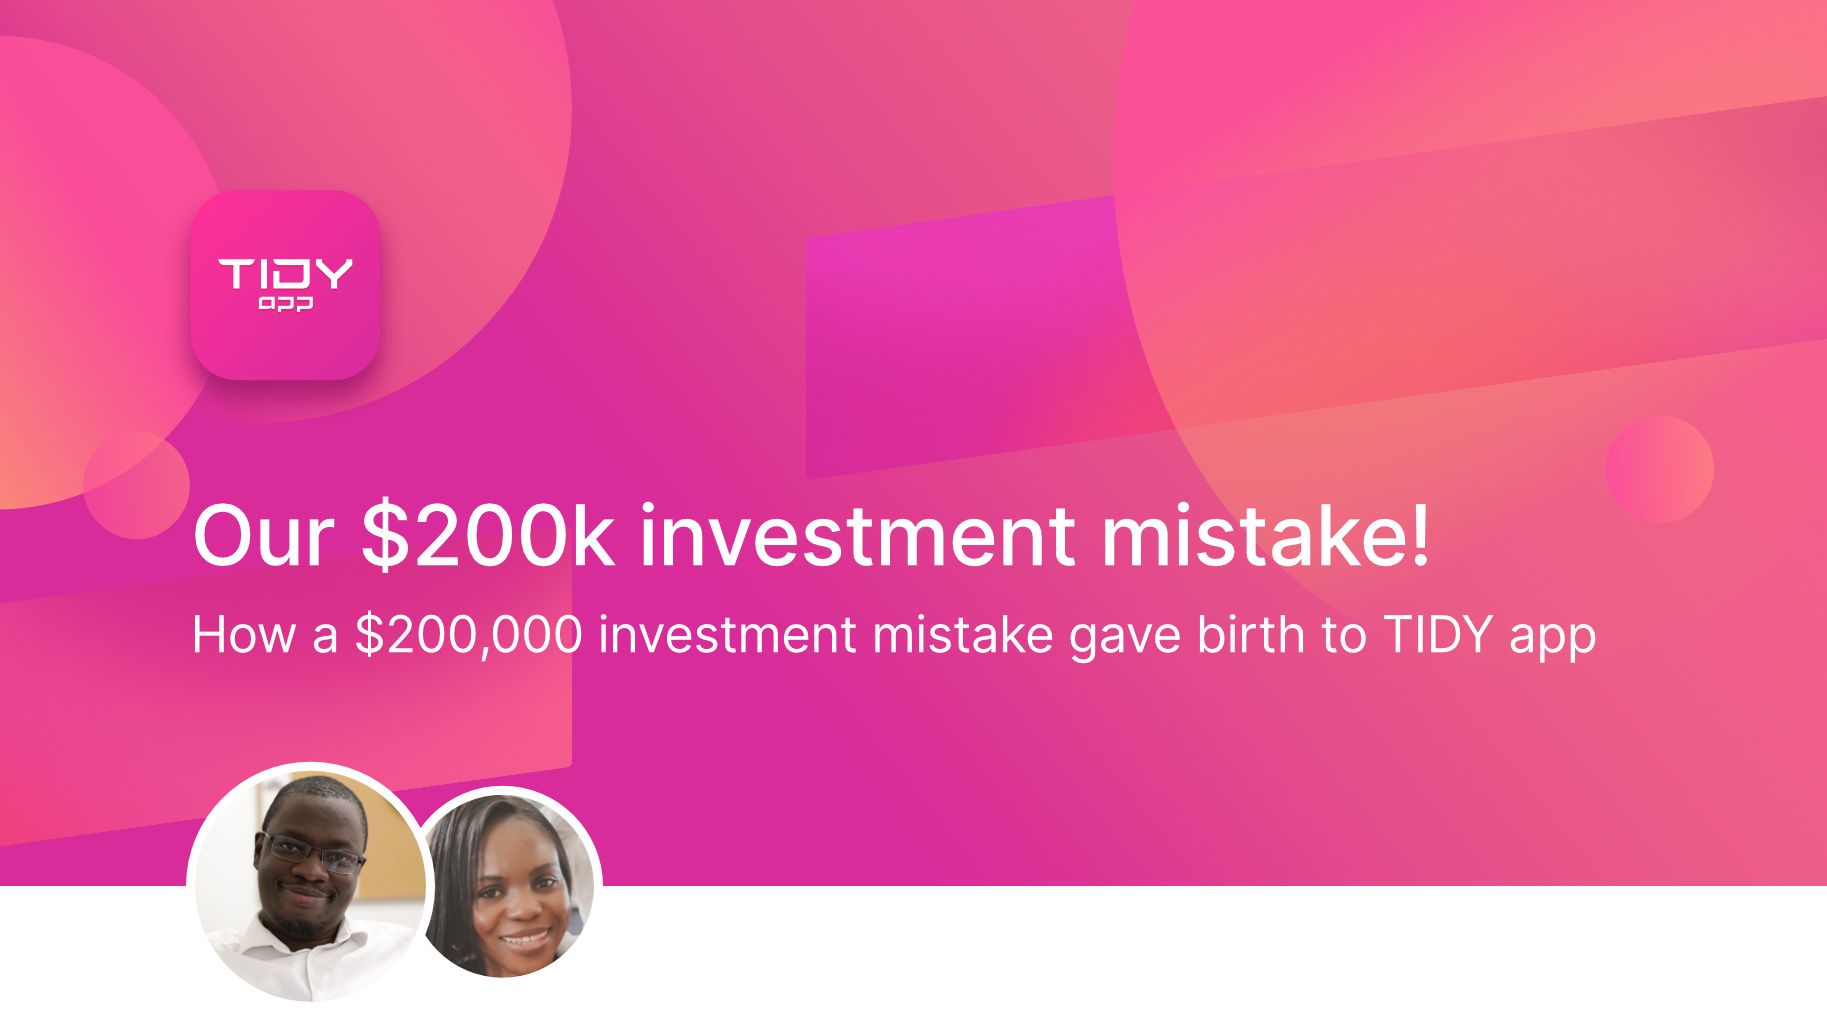 Our $200k investment mistake!